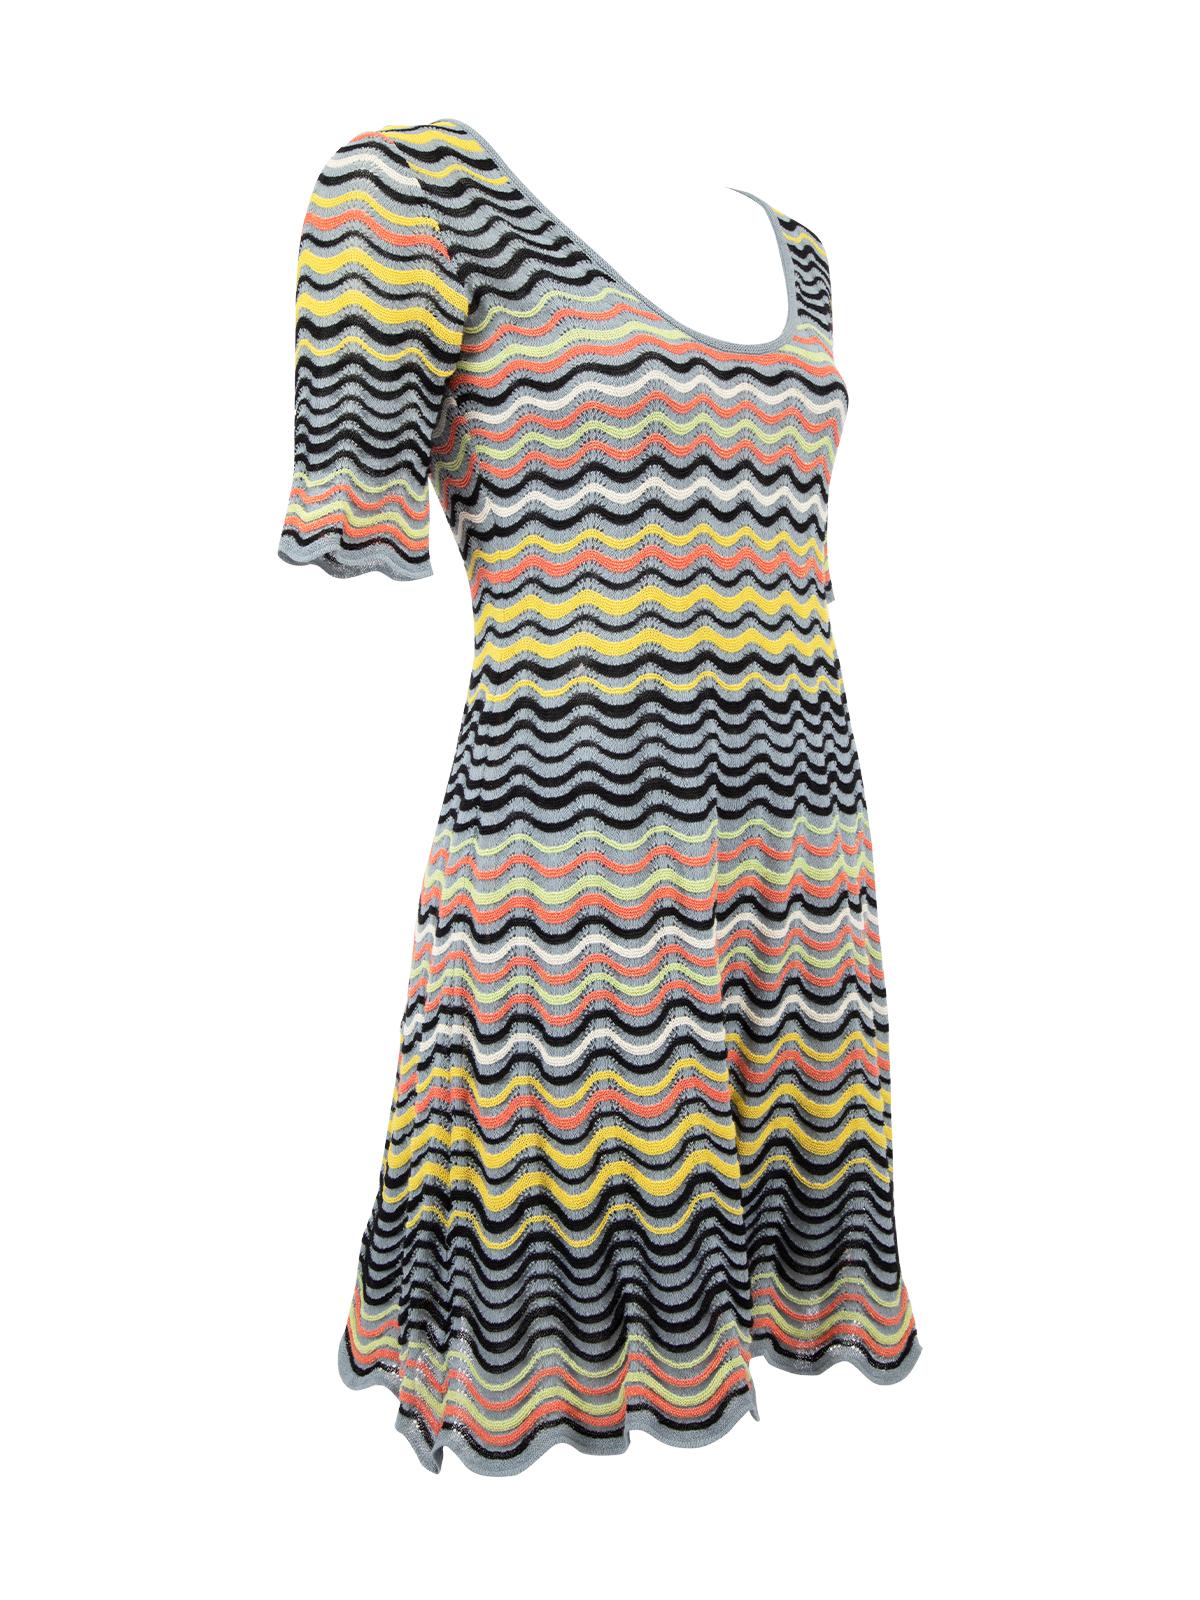 CONDITION is Very good. Minimal wear to dress is evident. Minimal loose threads seen on this used Missoni designer resale item. Details Multicolour Viscose Attached slip Short sleeves Round neck Made in China Composition 62% viscose Care